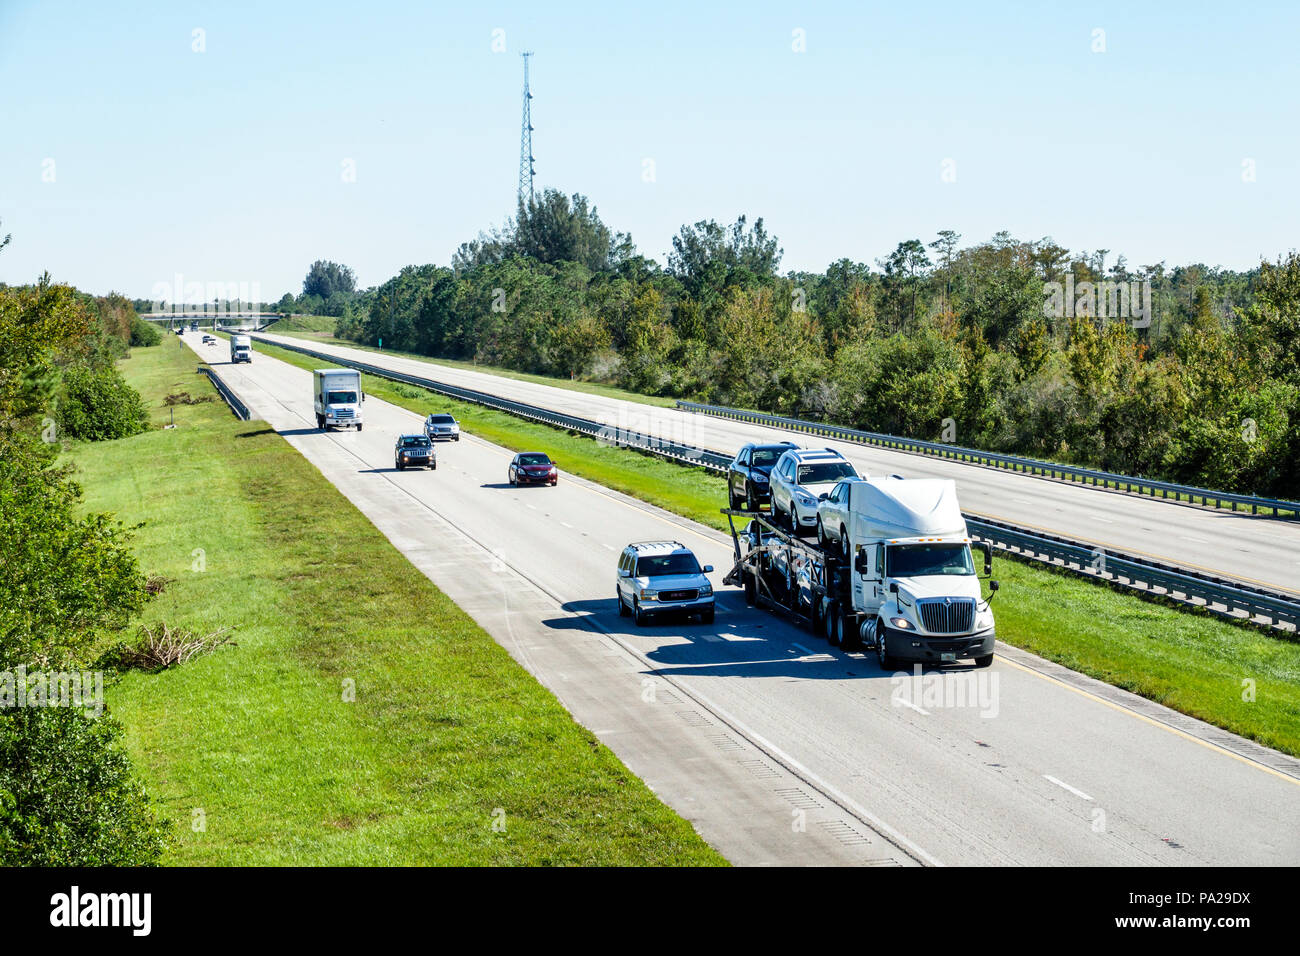 Florida,Kenansville,Florida Turnpike toll road highway traffic truck lorry,two lane divided highway,median,FL171029143 Stock Photo